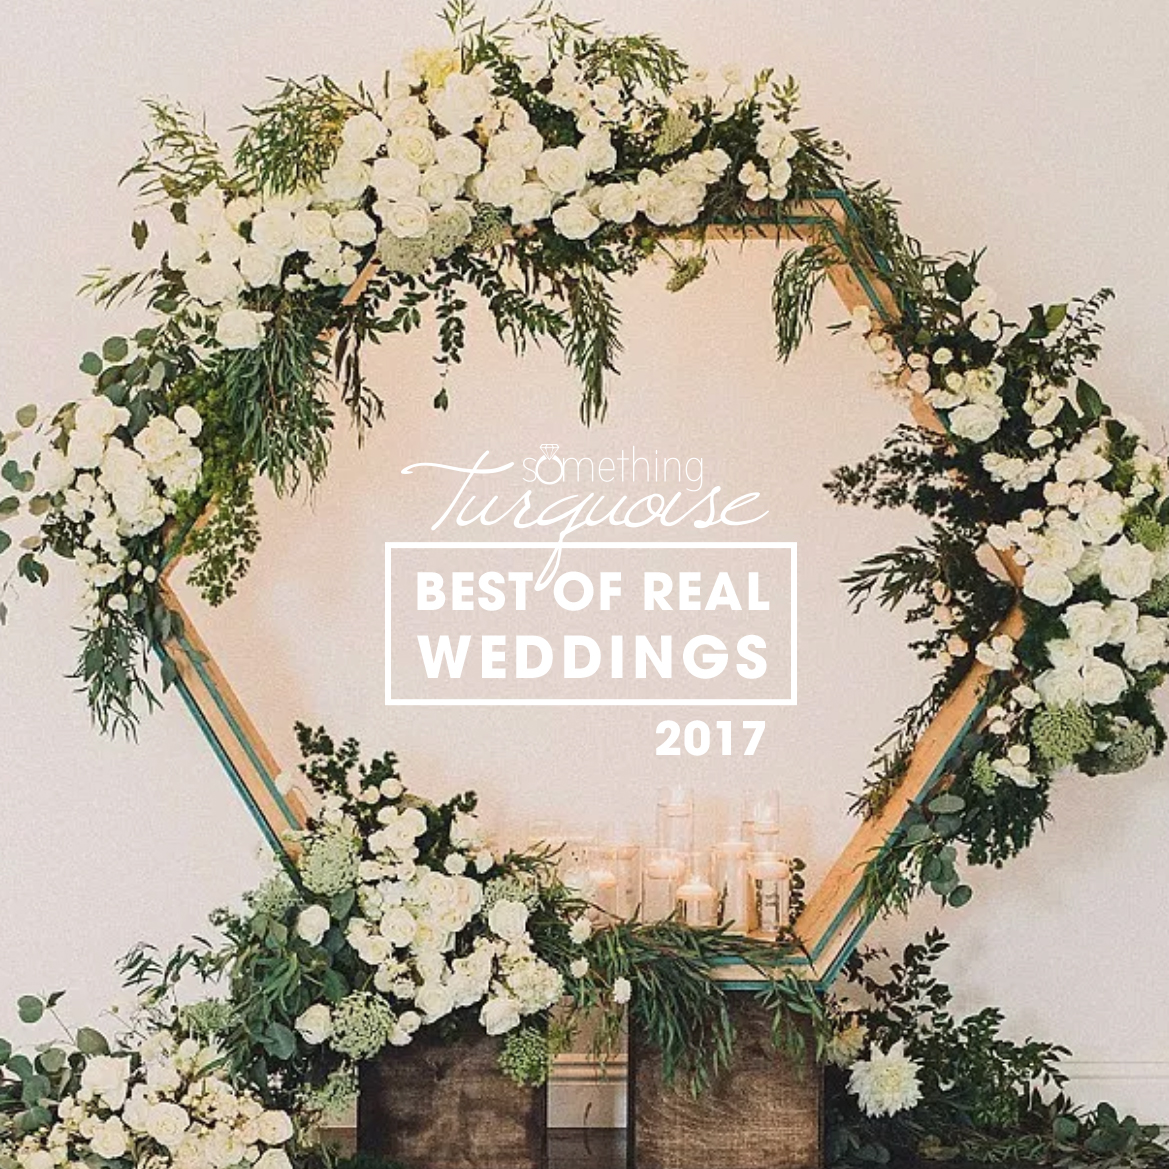 The Best of Real Weddings for 2017, did you event make the cut?